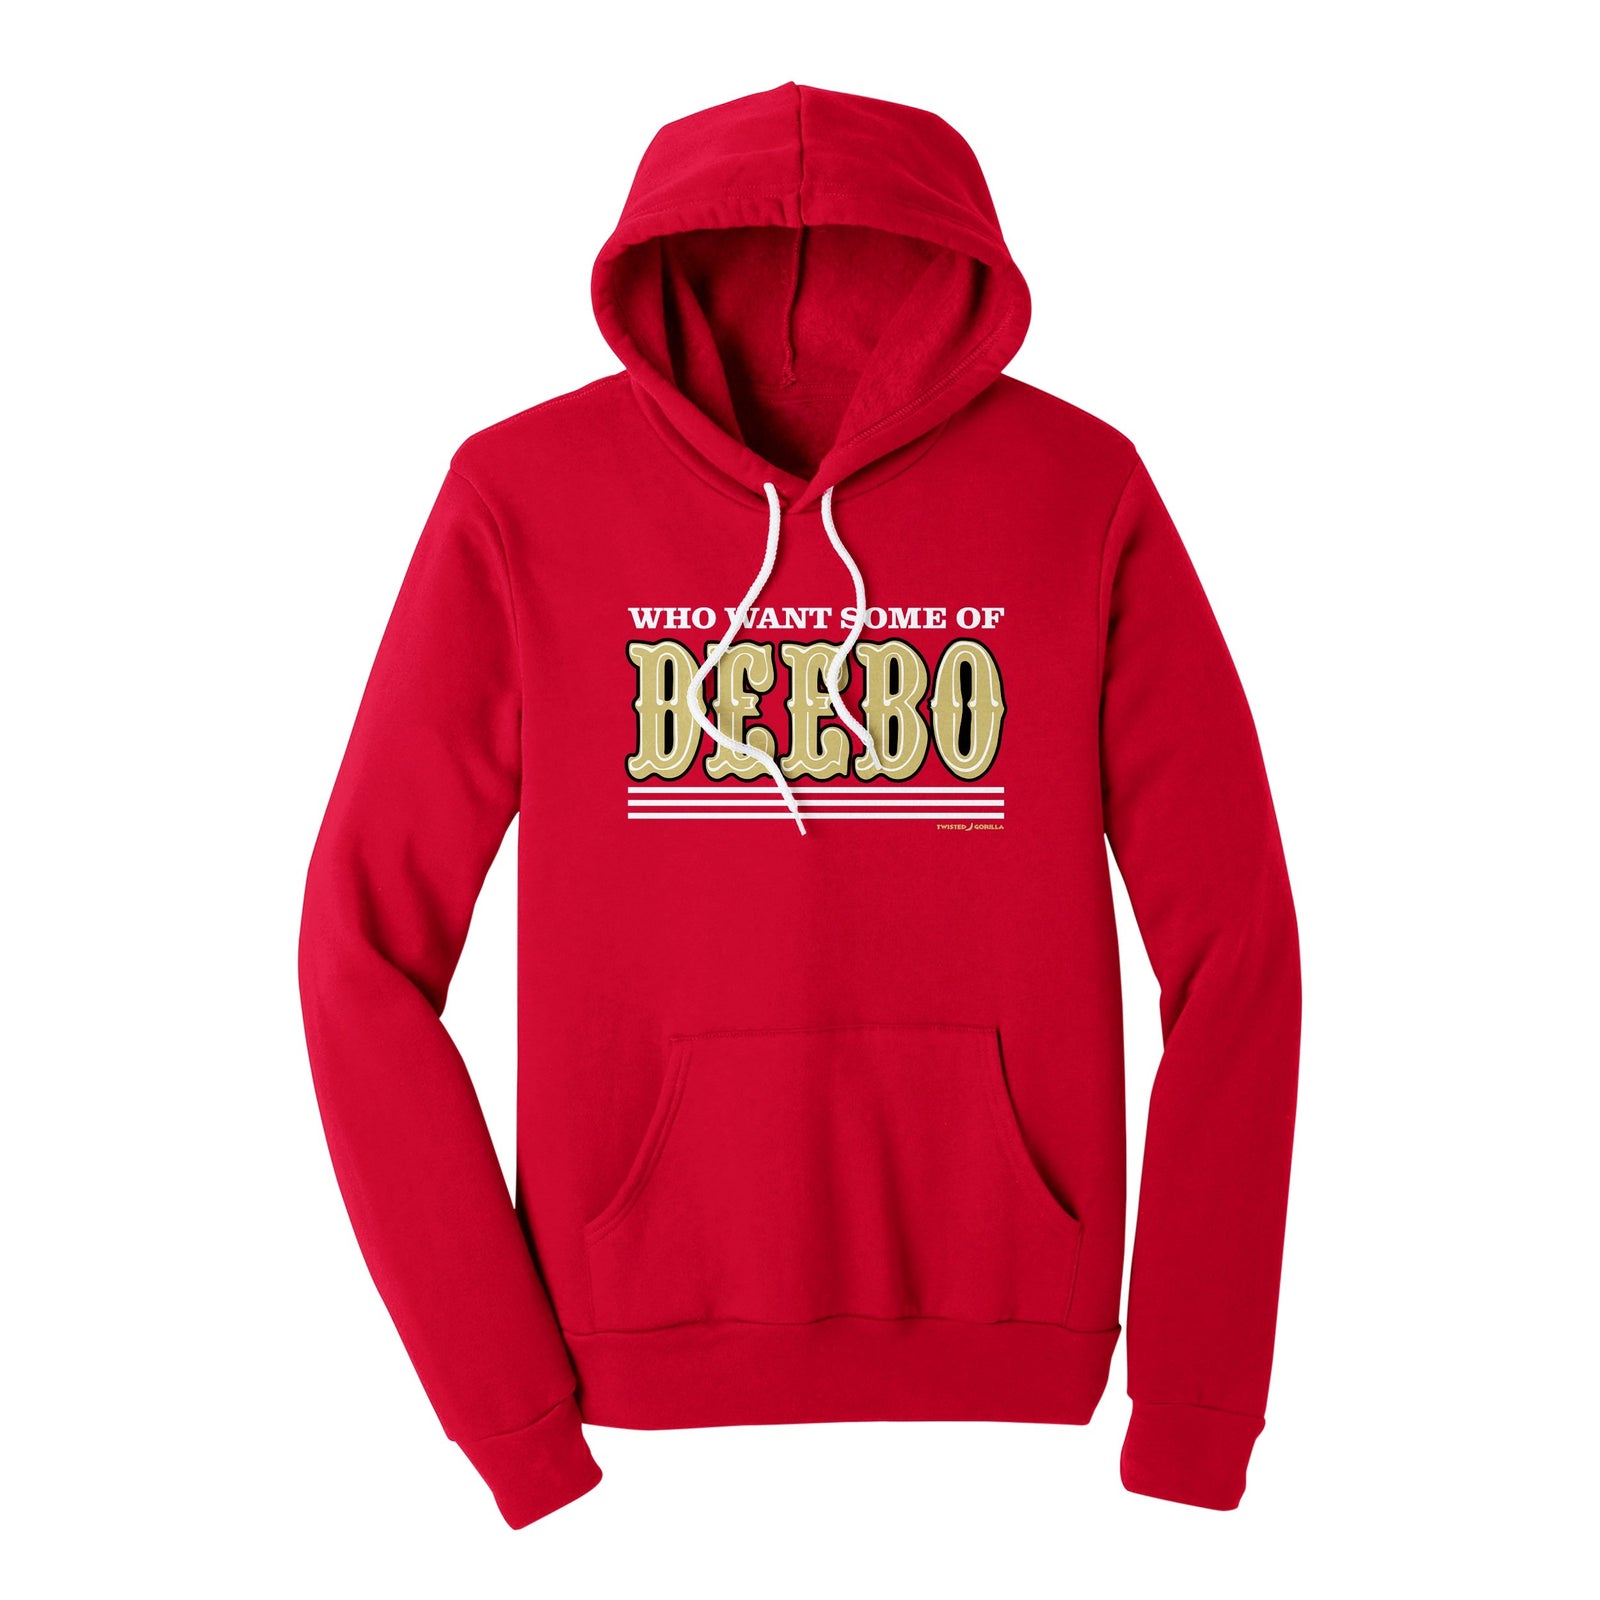 //cdn.shopify.com/s/files/1/0274/2488/2766/products/who-want-some-of-deebo-hoodie-787157_5000x.jpg?v=1675243243 5000w,
    //cdn.shopify.com/s/files/1/0274/2488/2766/products/who-want-some-of-deebo-hoodie-787157_4500x.jpg?v=1675243243 4500w,
    //cdn.shopify.com/s/files/1/0274/2488/2766/products/who-want-some-of-deebo-hoodie-787157_4000x.jpg?v=1675243243 4000w,
    //cdn.shopify.com/s/files/1/0274/2488/2766/products/who-want-some-of-deebo-hoodie-787157_3500x.jpg?v=1675243243 3500w,
    //cdn.shopify.com/s/files/1/0274/2488/2766/products/who-want-some-of-deebo-hoodie-787157_3000x.jpg?v=1675243243 3000w,
    //cdn.shopify.com/s/files/1/0274/2488/2766/products/who-want-some-of-deebo-hoodie-787157_2500x.jpg?v=1675243243 2500w,
    //cdn.shopify.com/s/files/1/0274/2488/2766/products/who-want-some-of-deebo-hoodie-787157_2000x.jpg?v=1675243243 2000w,
    //cdn.shopify.com/s/files/1/0274/2488/2766/products/who-want-some-of-deebo-hoodie-787157_1800x.jpg?v=1675243243 1800w,
    //cdn.shopify.com/s/files/1/0274/2488/2766/products/who-want-some-of-deebo-hoodie-787157_1600x.jpg?v=1675243243 1600w,
    //cdn.shopify.com/s/files/1/0274/2488/2766/products/who-want-some-of-deebo-hoodie-787157_1400x.jpg?v=1675243243 1400w,
    //cdn.shopify.com/s/files/1/0274/2488/2766/products/who-want-some-of-deebo-hoodie-787157_1200x.jpg?v=1675243243 1200w,
    //cdn.shopify.com/s/files/1/0274/2488/2766/products/who-want-some-of-deebo-hoodie-787157_1000x.jpg?v=1675243243 1000w,
    //cdn.shopify.com/s/files/1/0274/2488/2766/products/who-want-some-of-deebo-hoodie-787157_800x.jpg?v=1675243243 800w,
    //cdn.shopify.com/s/files/1/0274/2488/2766/products/who-want-some-of-deebo-hoodie-787157_600x.jpg?v=1675243243 600w,
    //cdn.shopify.com/s/files/1/0274/2488/2766/products/who-want-some-of-deebo-hoodie-787157_400x.jpg?v=1675243243 400w,
    //cdn.shopify.com/s/files/1/0274/2488/2766/products/who-want-some-of-deebo-hoodie-787157_200x.jpg?v=1675243243 200w